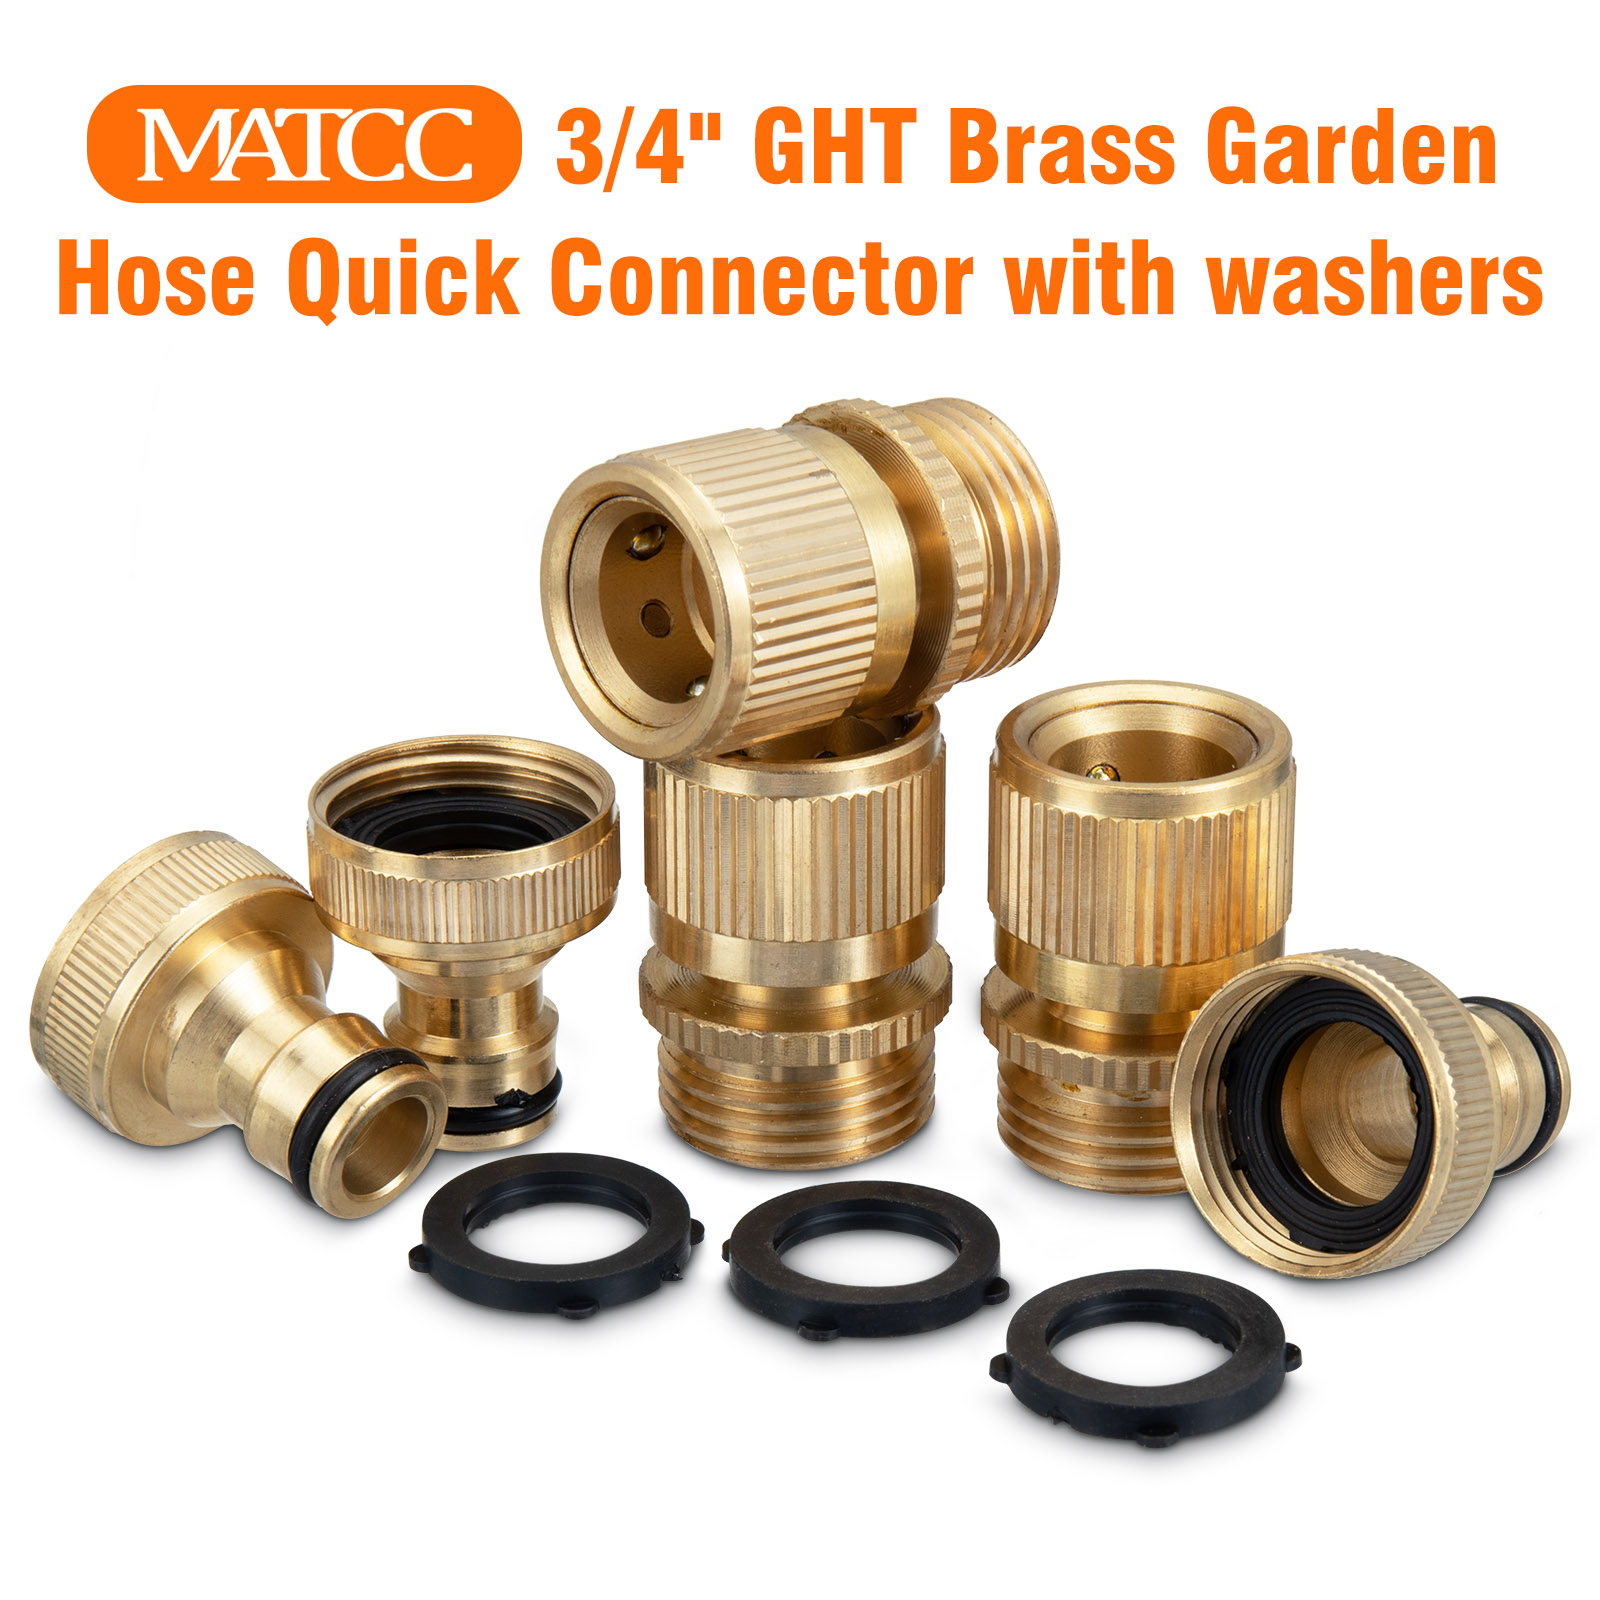 MATCC-Brass-Inner-Teeth-Quick-Connector-Set-34quot-GHT-Brass-Garden-Hose-Quick-Connector-With-Washer-1898352-2